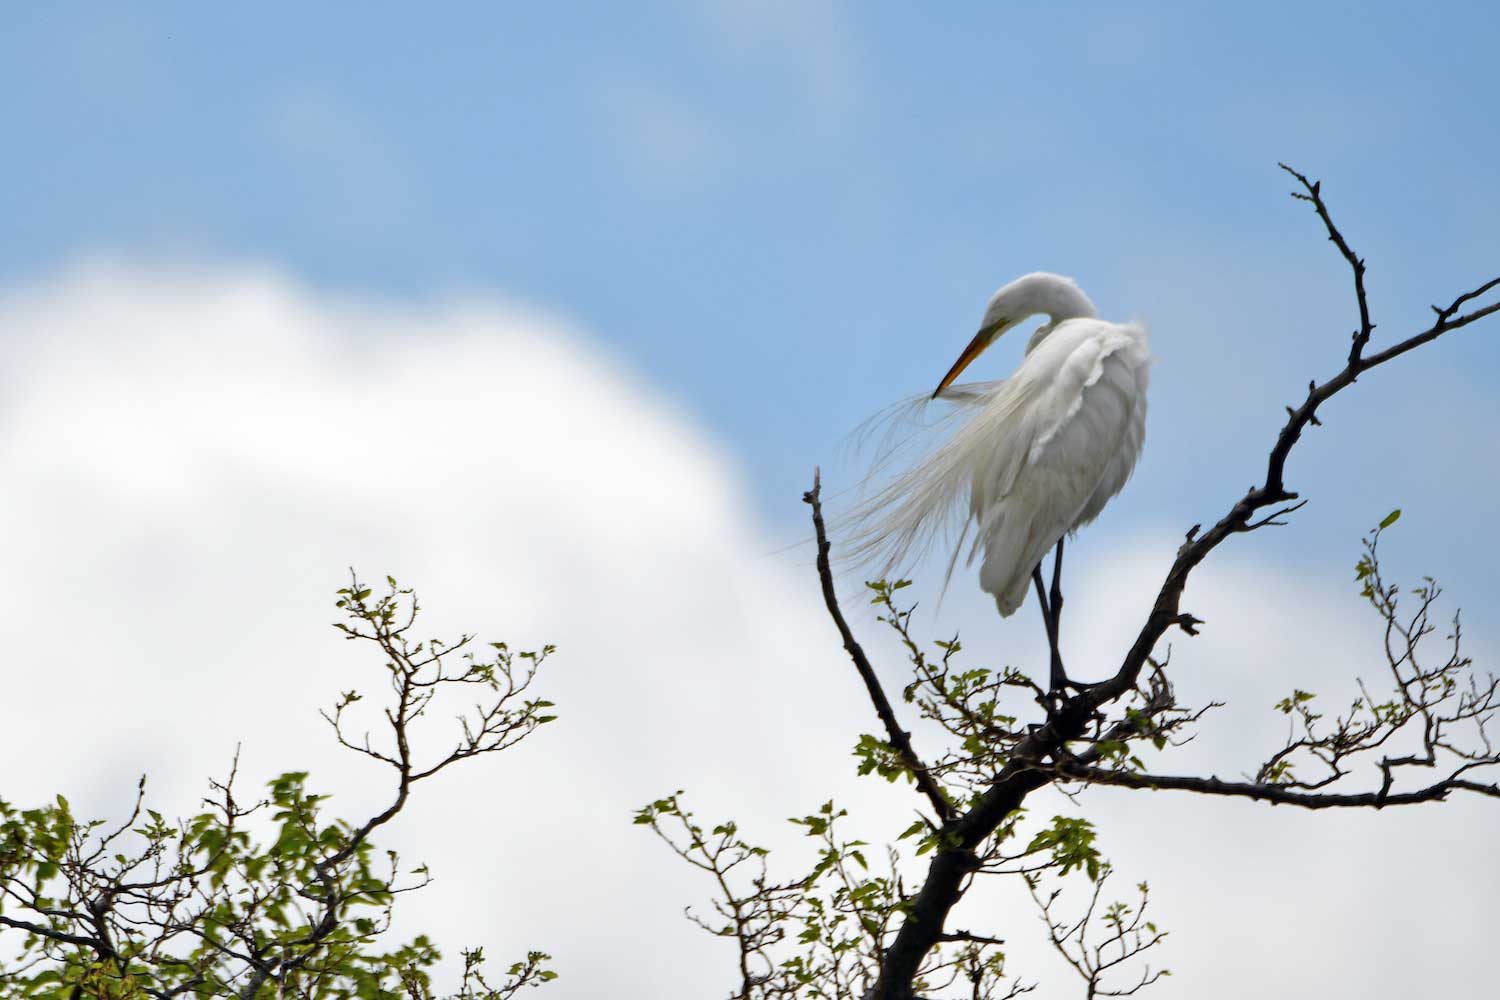 A great egret preening its feathers while perched atop a tree.